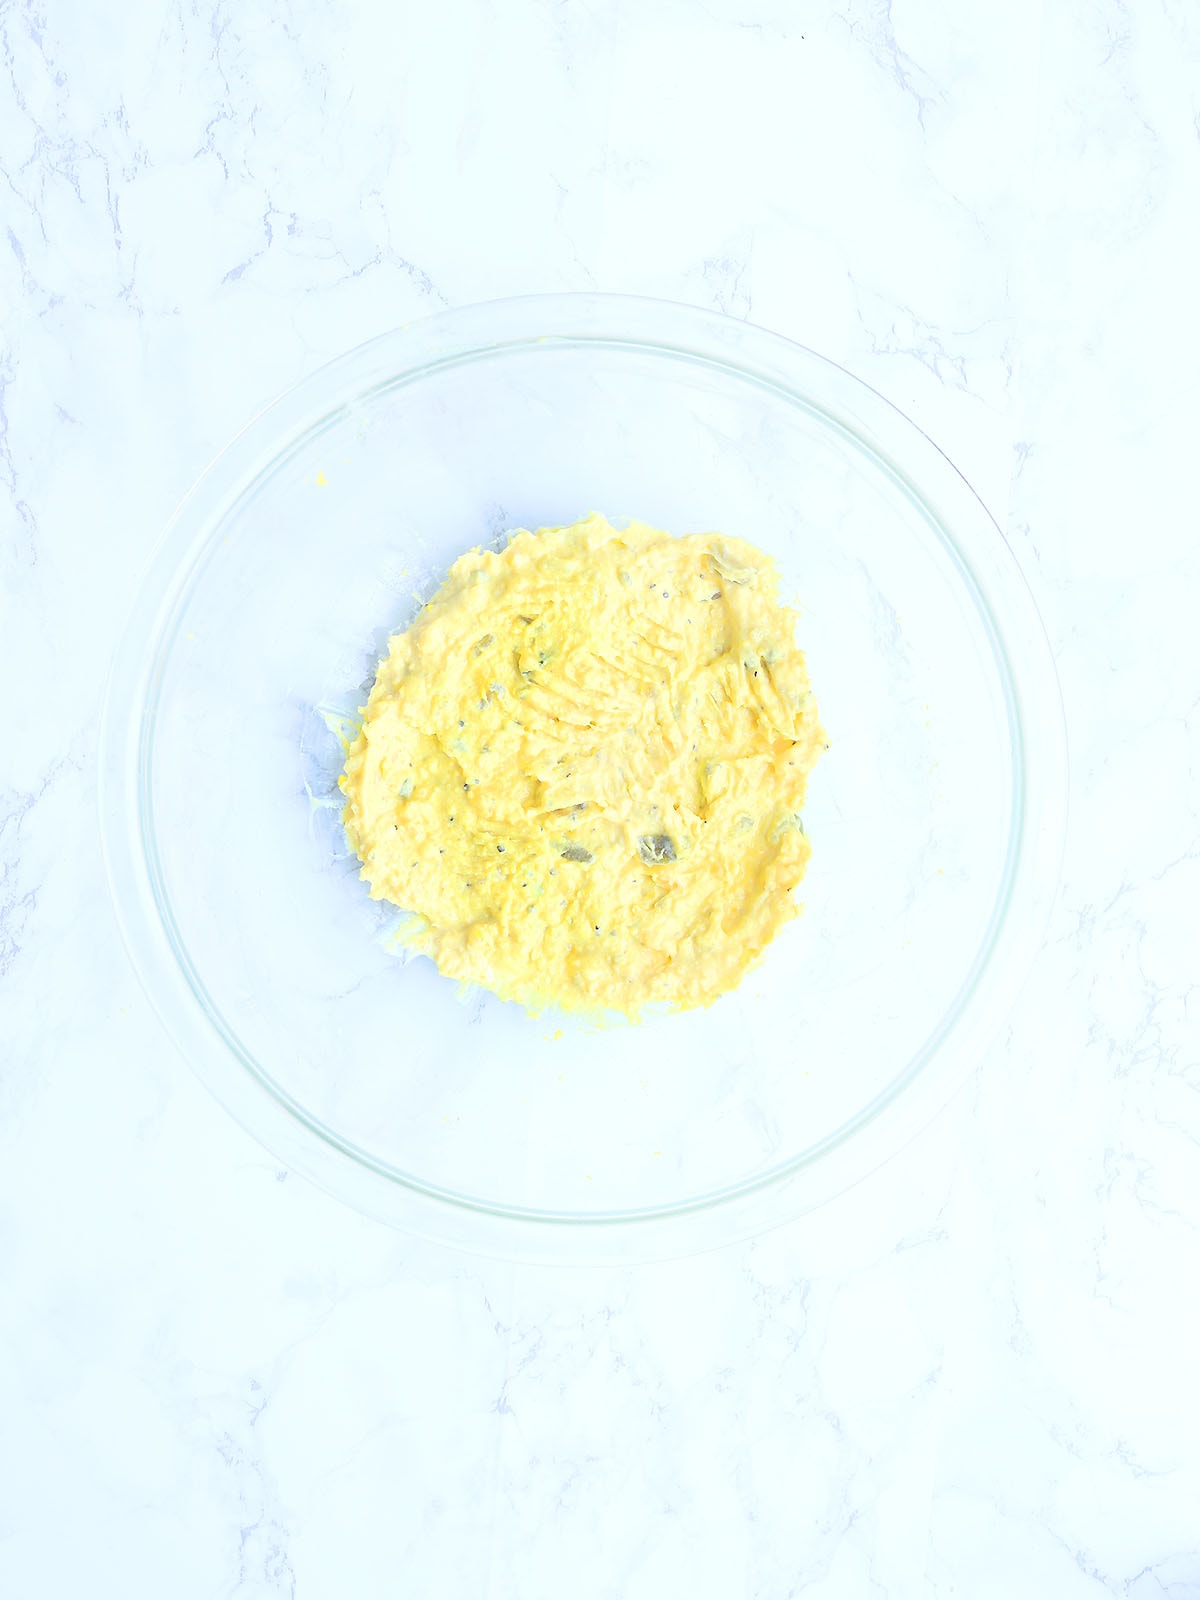 Deviled egg ingredients in a mixing bowl after they have been mixed together.